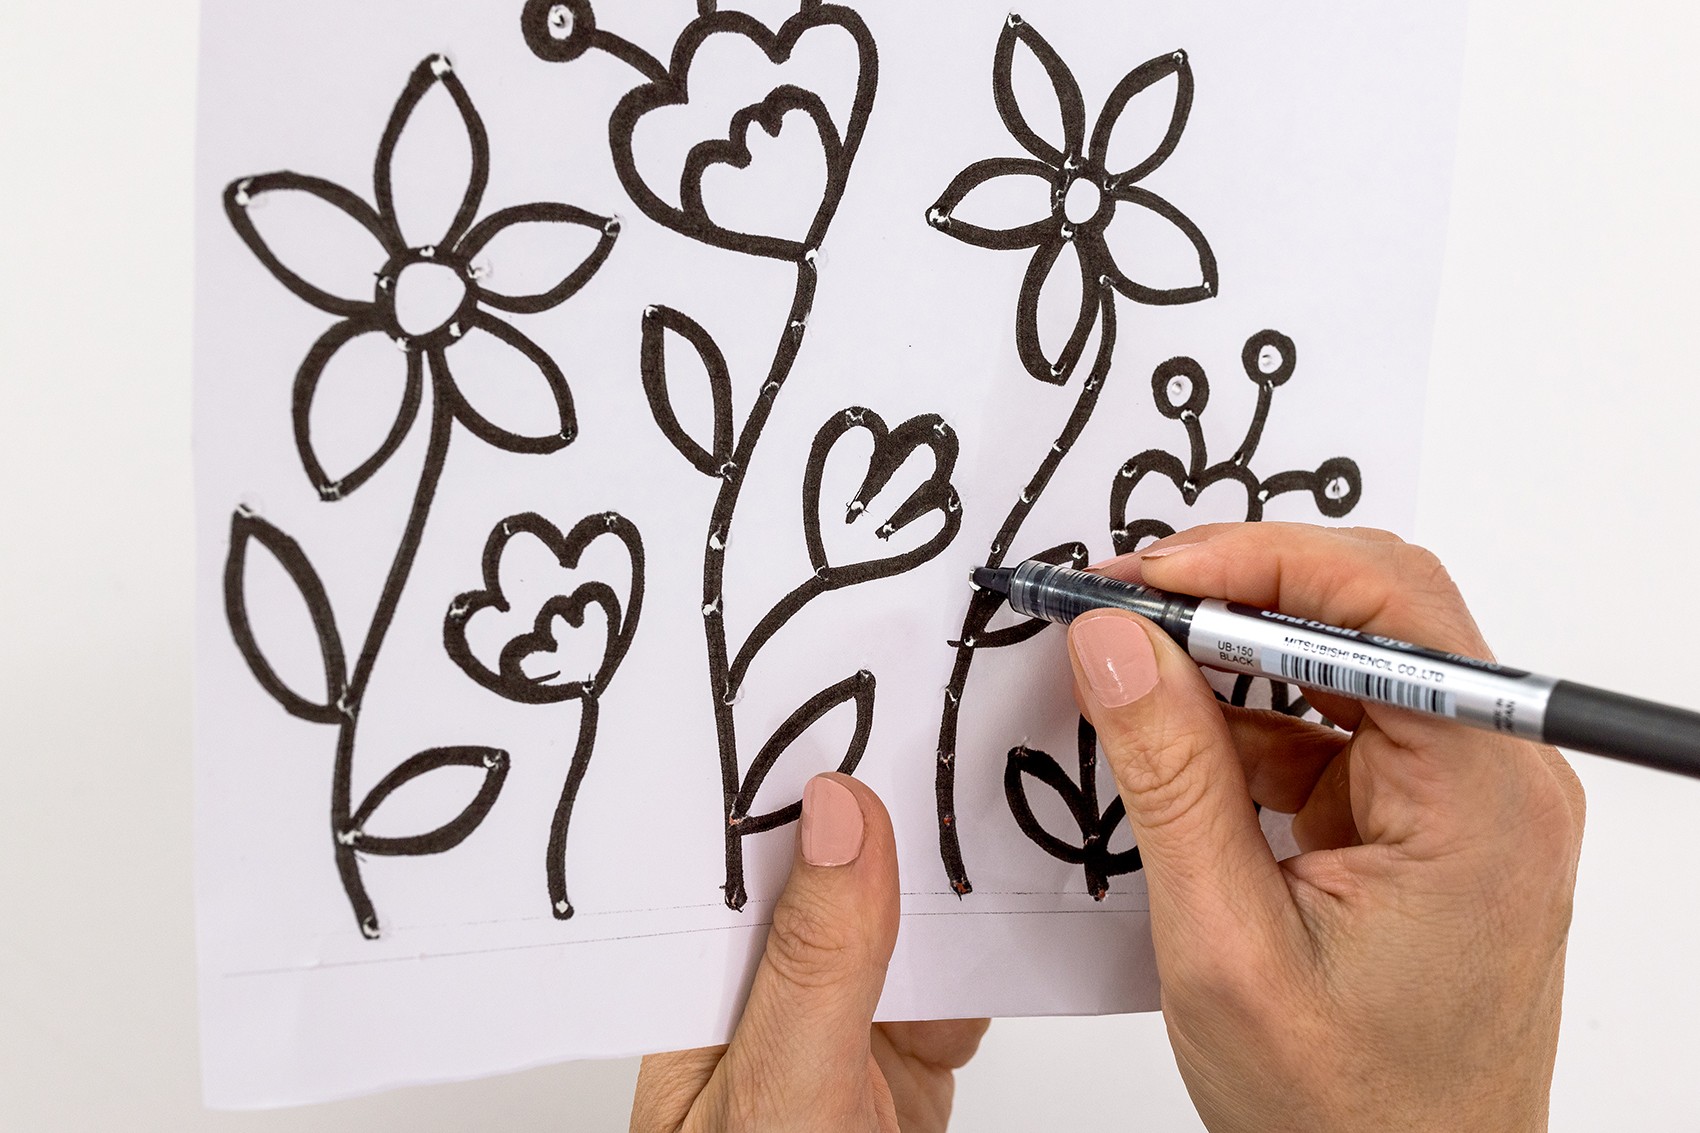 A hand stabs dots in a floral pattern.